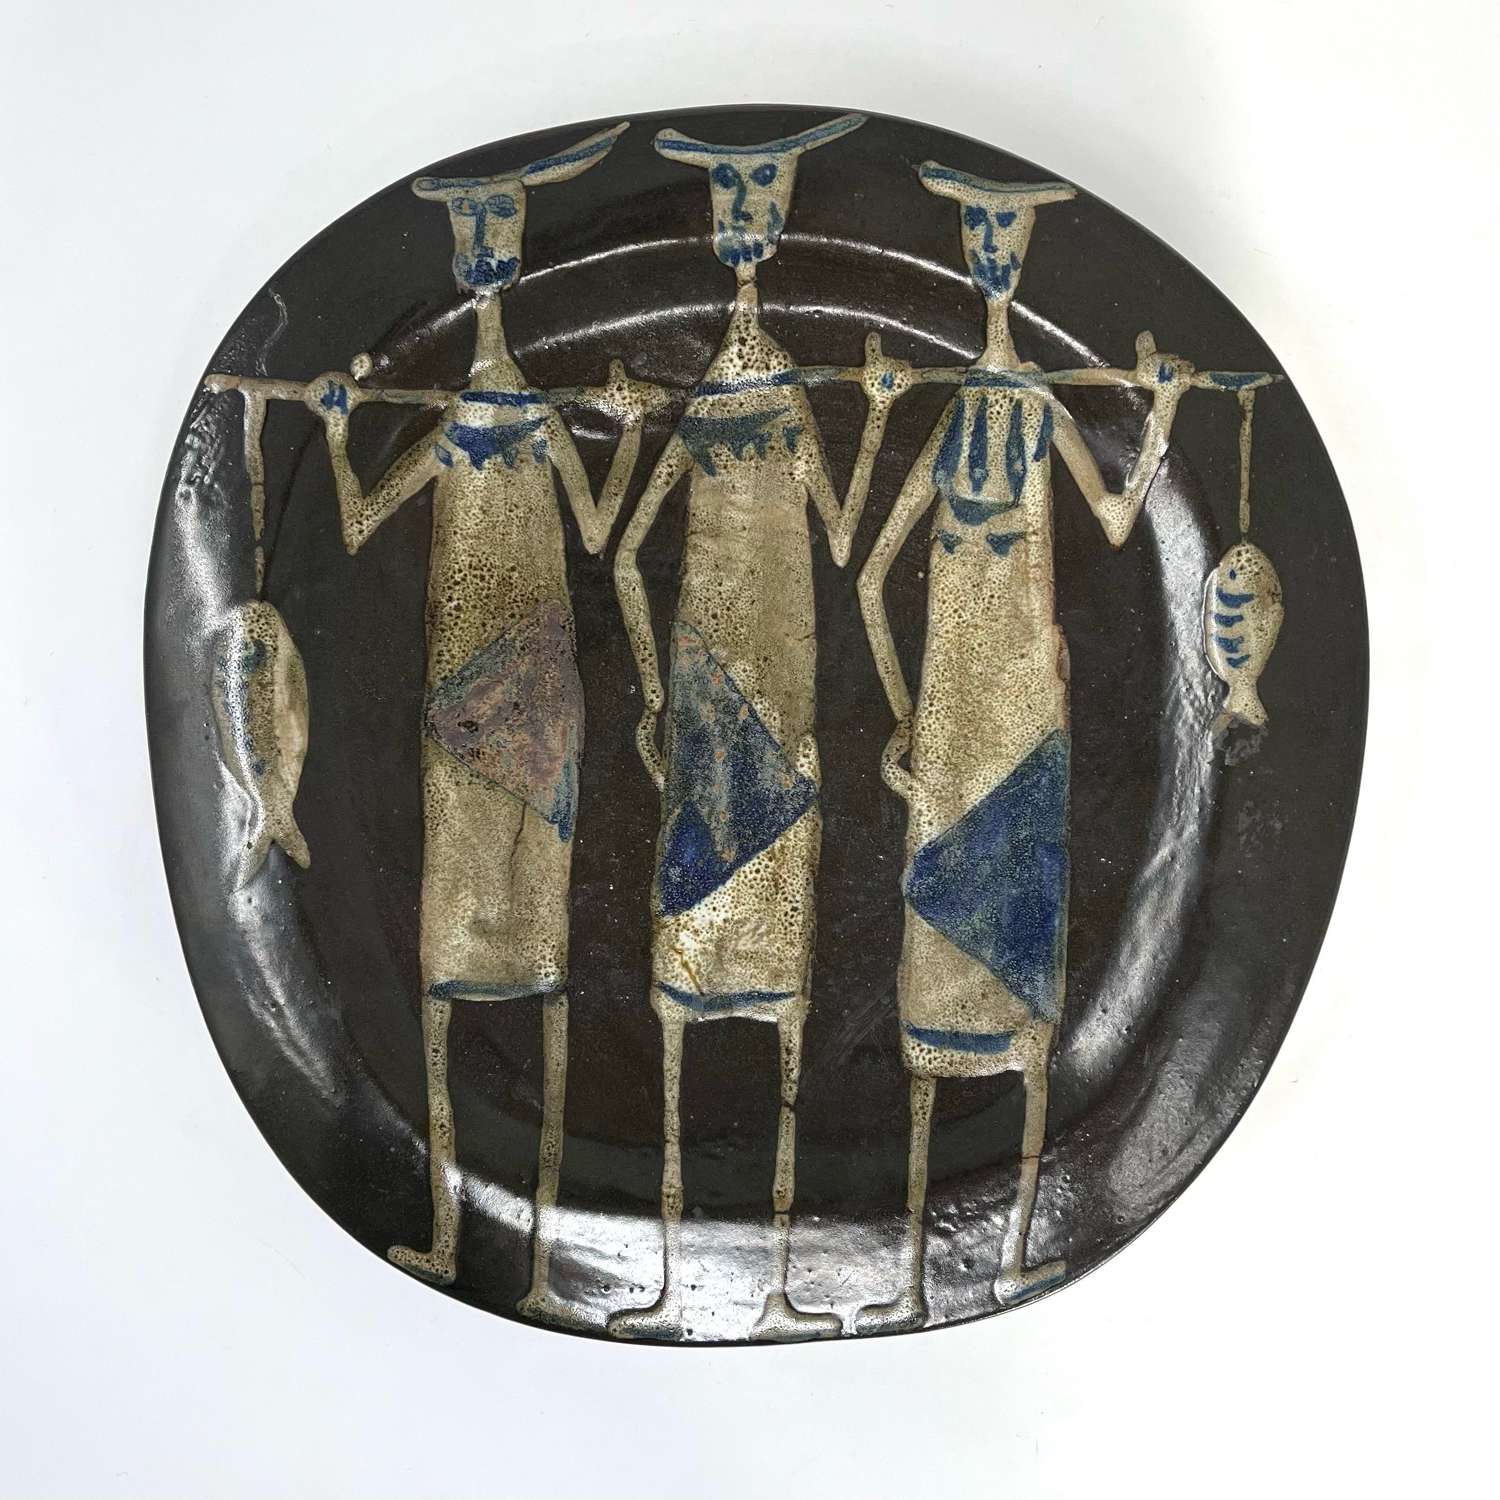 Ake Holm ceramic footed dish with three fisherman Sweden